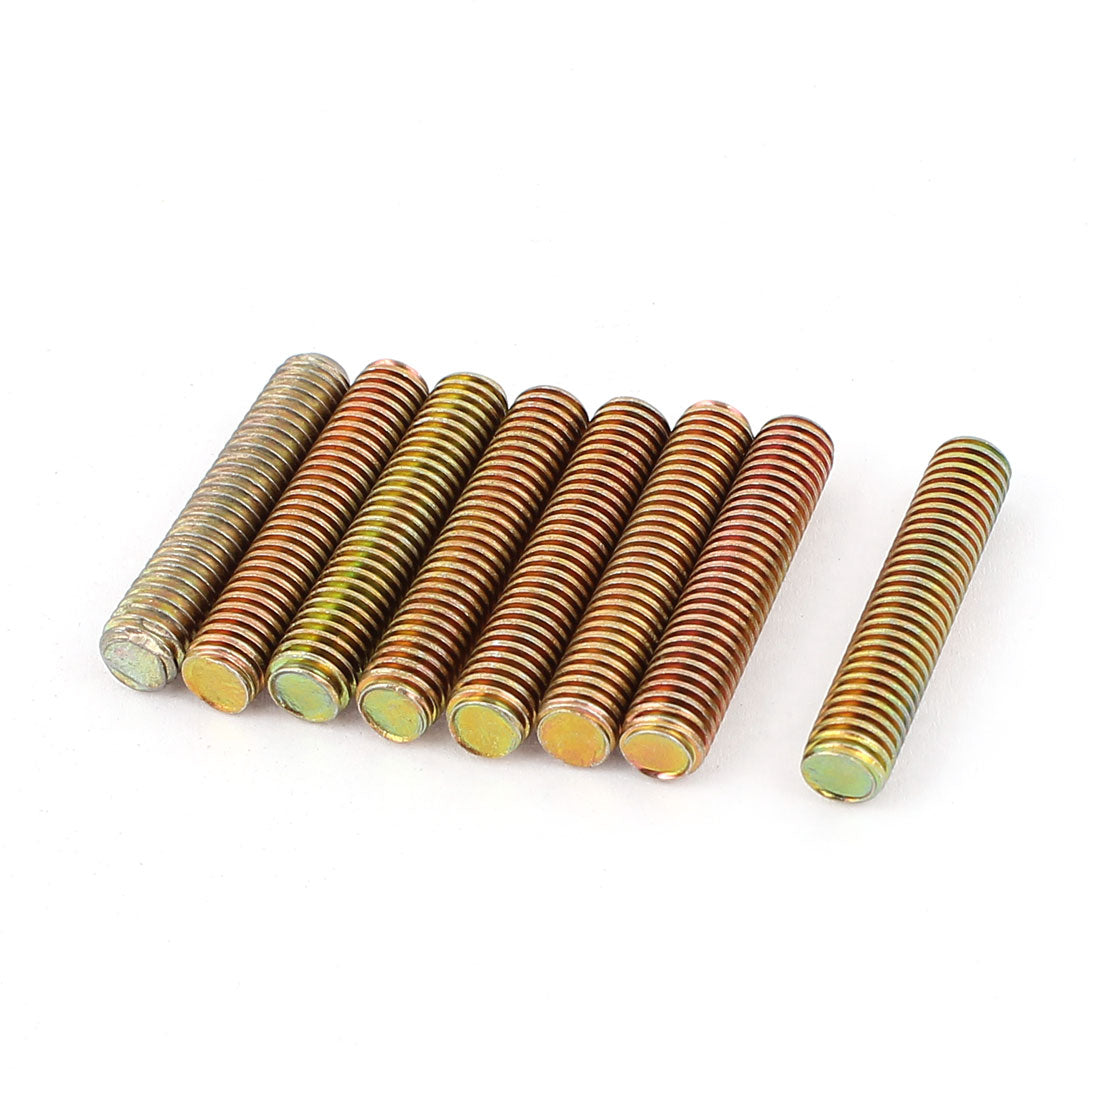 uxcell Uxcell 1mm Pitch M6 x 30mm Metal Male Threaded Rod Bar Bronze Tone 8 Pcs